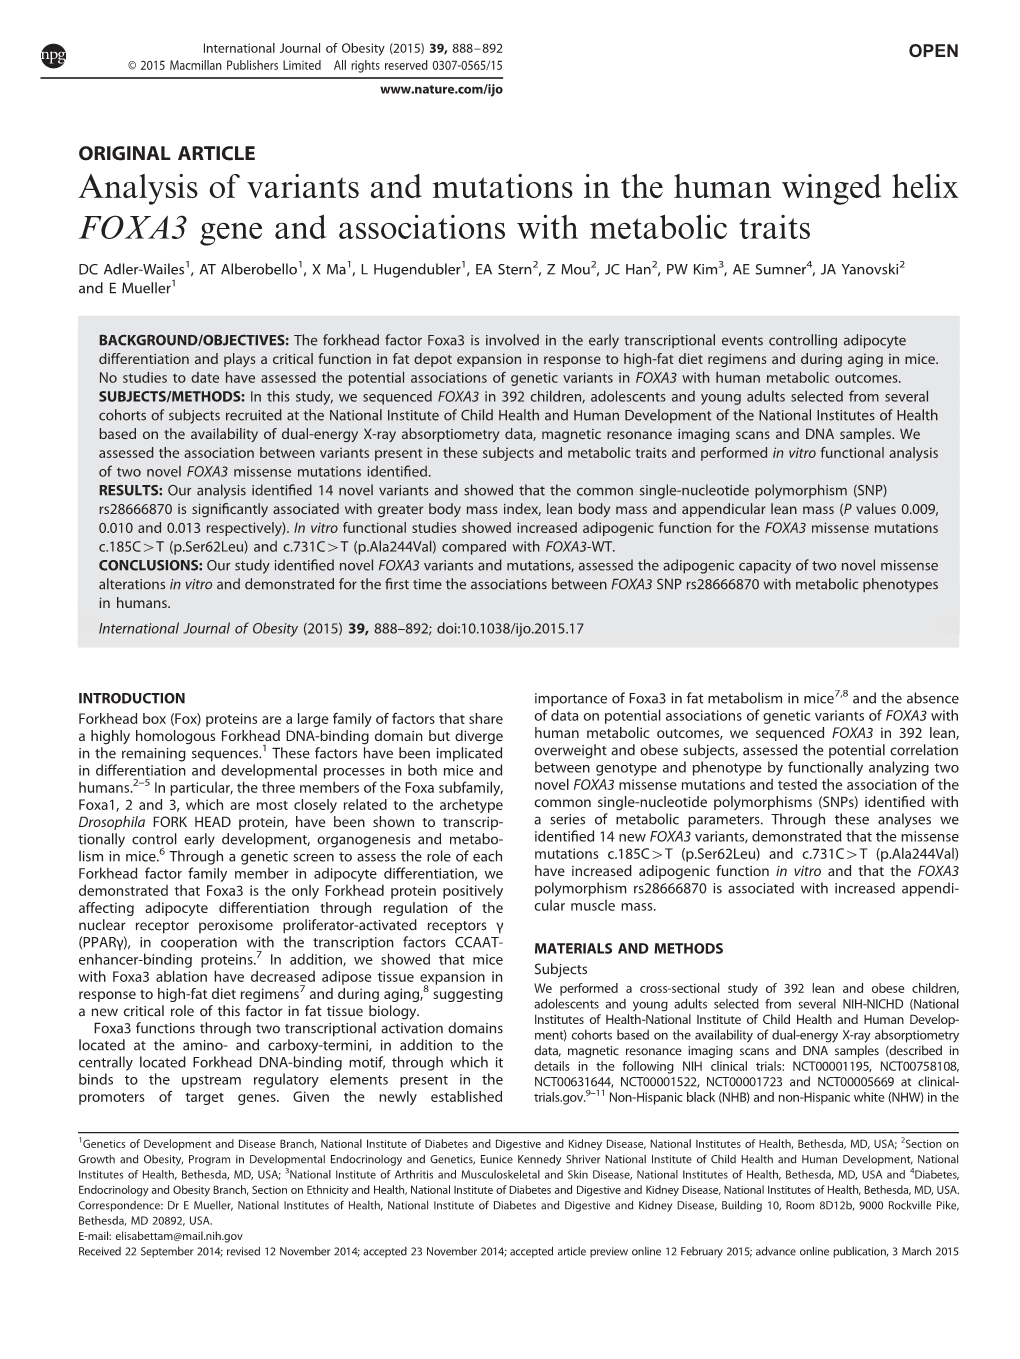 FOXA3 Gene and Associations with Metabolic Traits